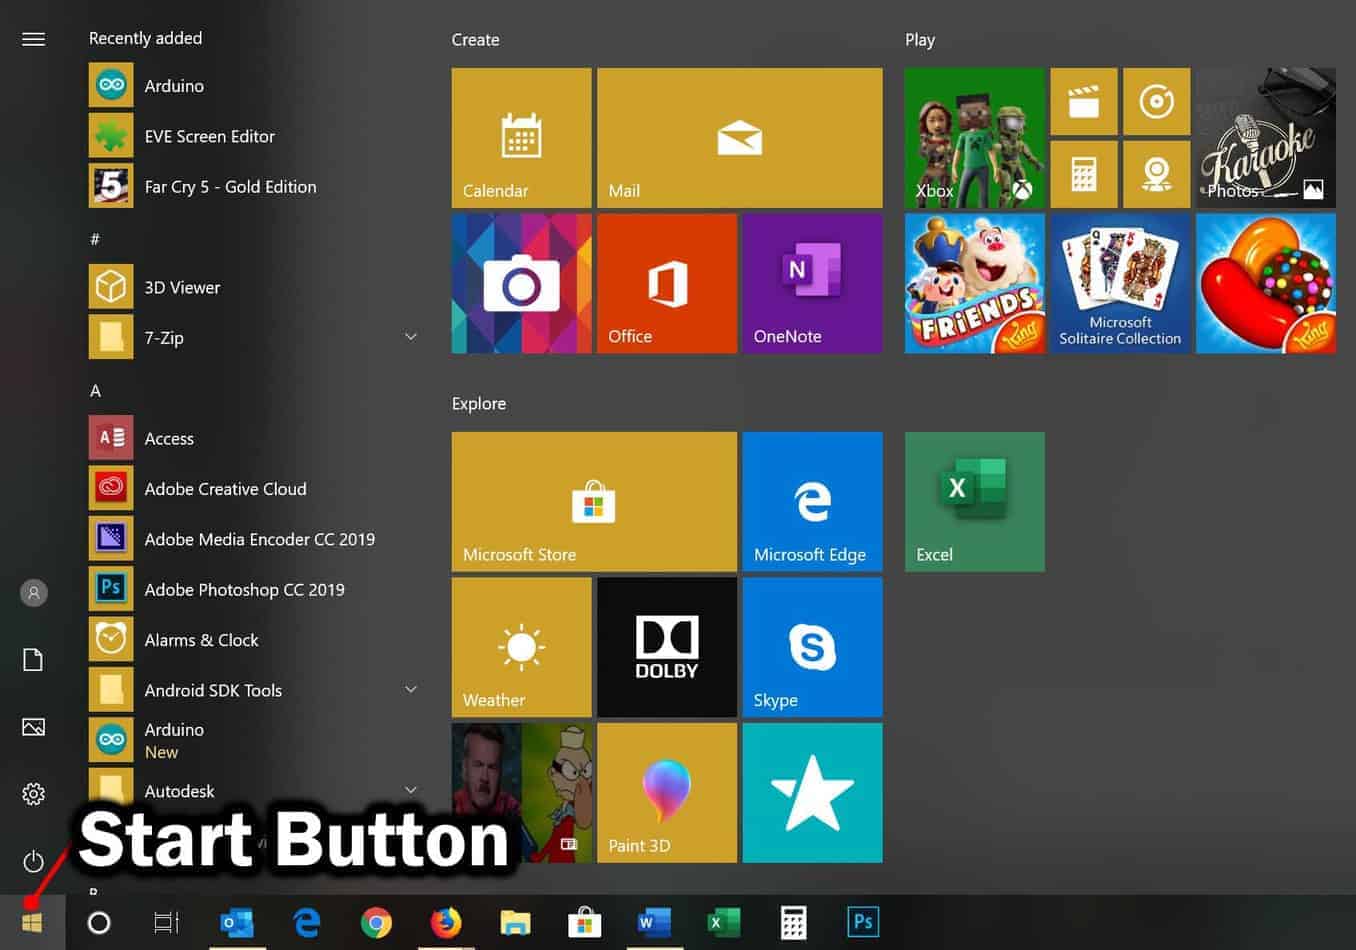 Open the Start Menu by clicking on the Windows icon located at the bottom left corner of the screen.
Click on Settings to open the Windows Settings menu.